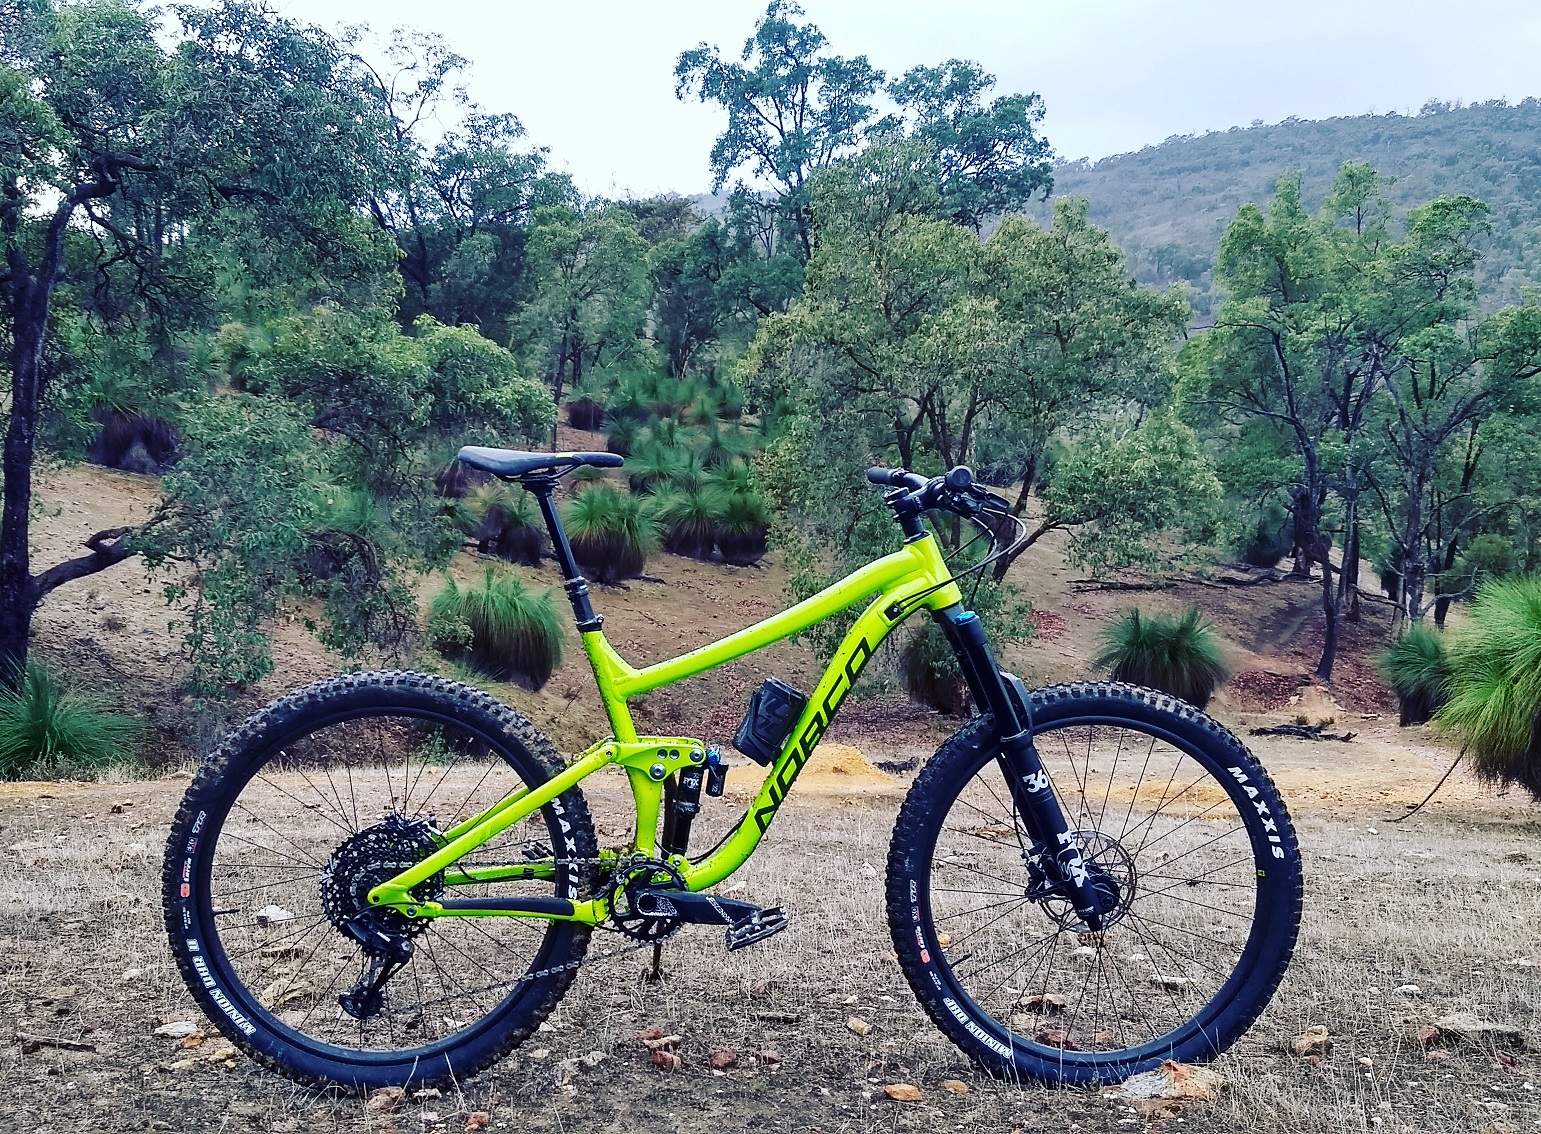 Bike Review: 2018 Norco Sight A1 – The 